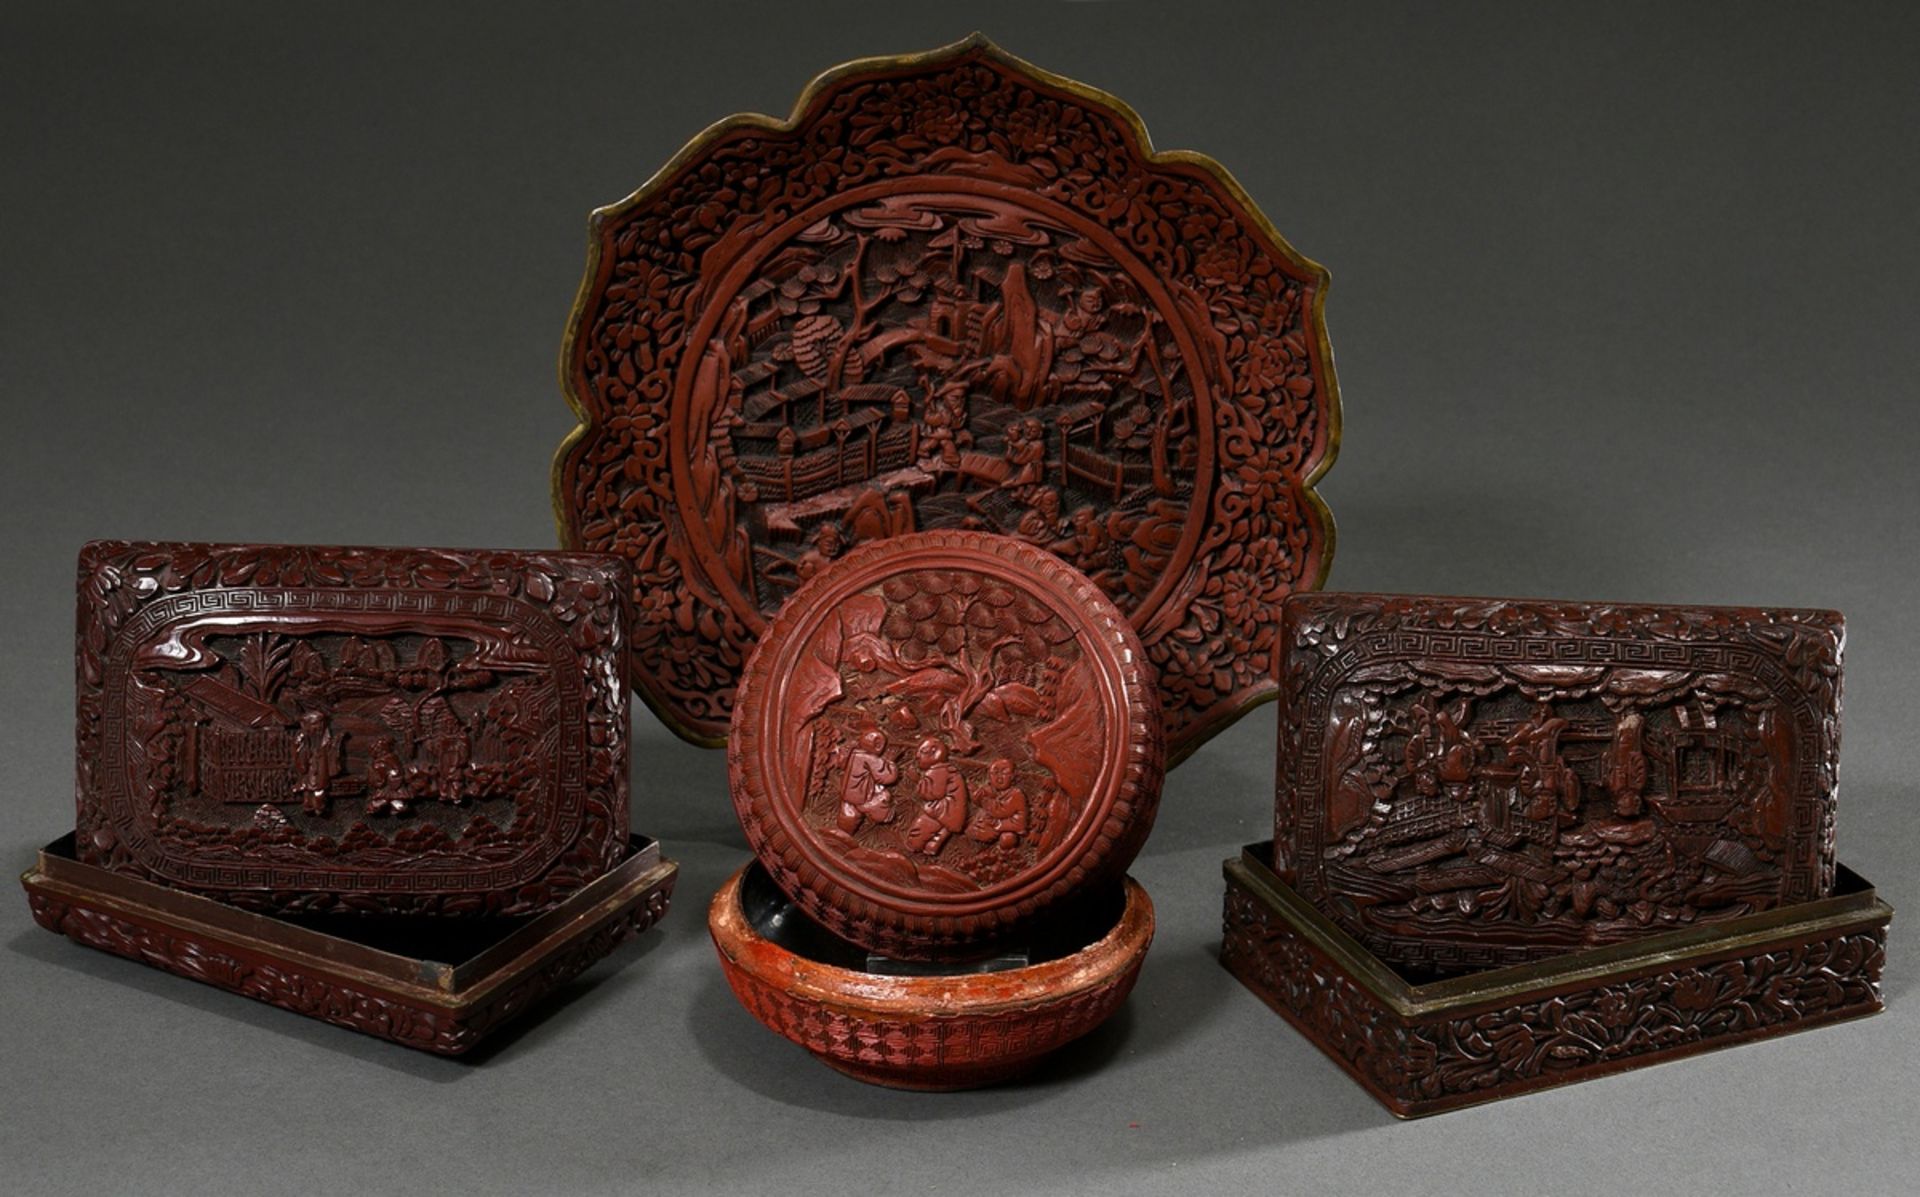 4 Various red carved lacquer objects: small round paper mache lidded box "Three playing children" (